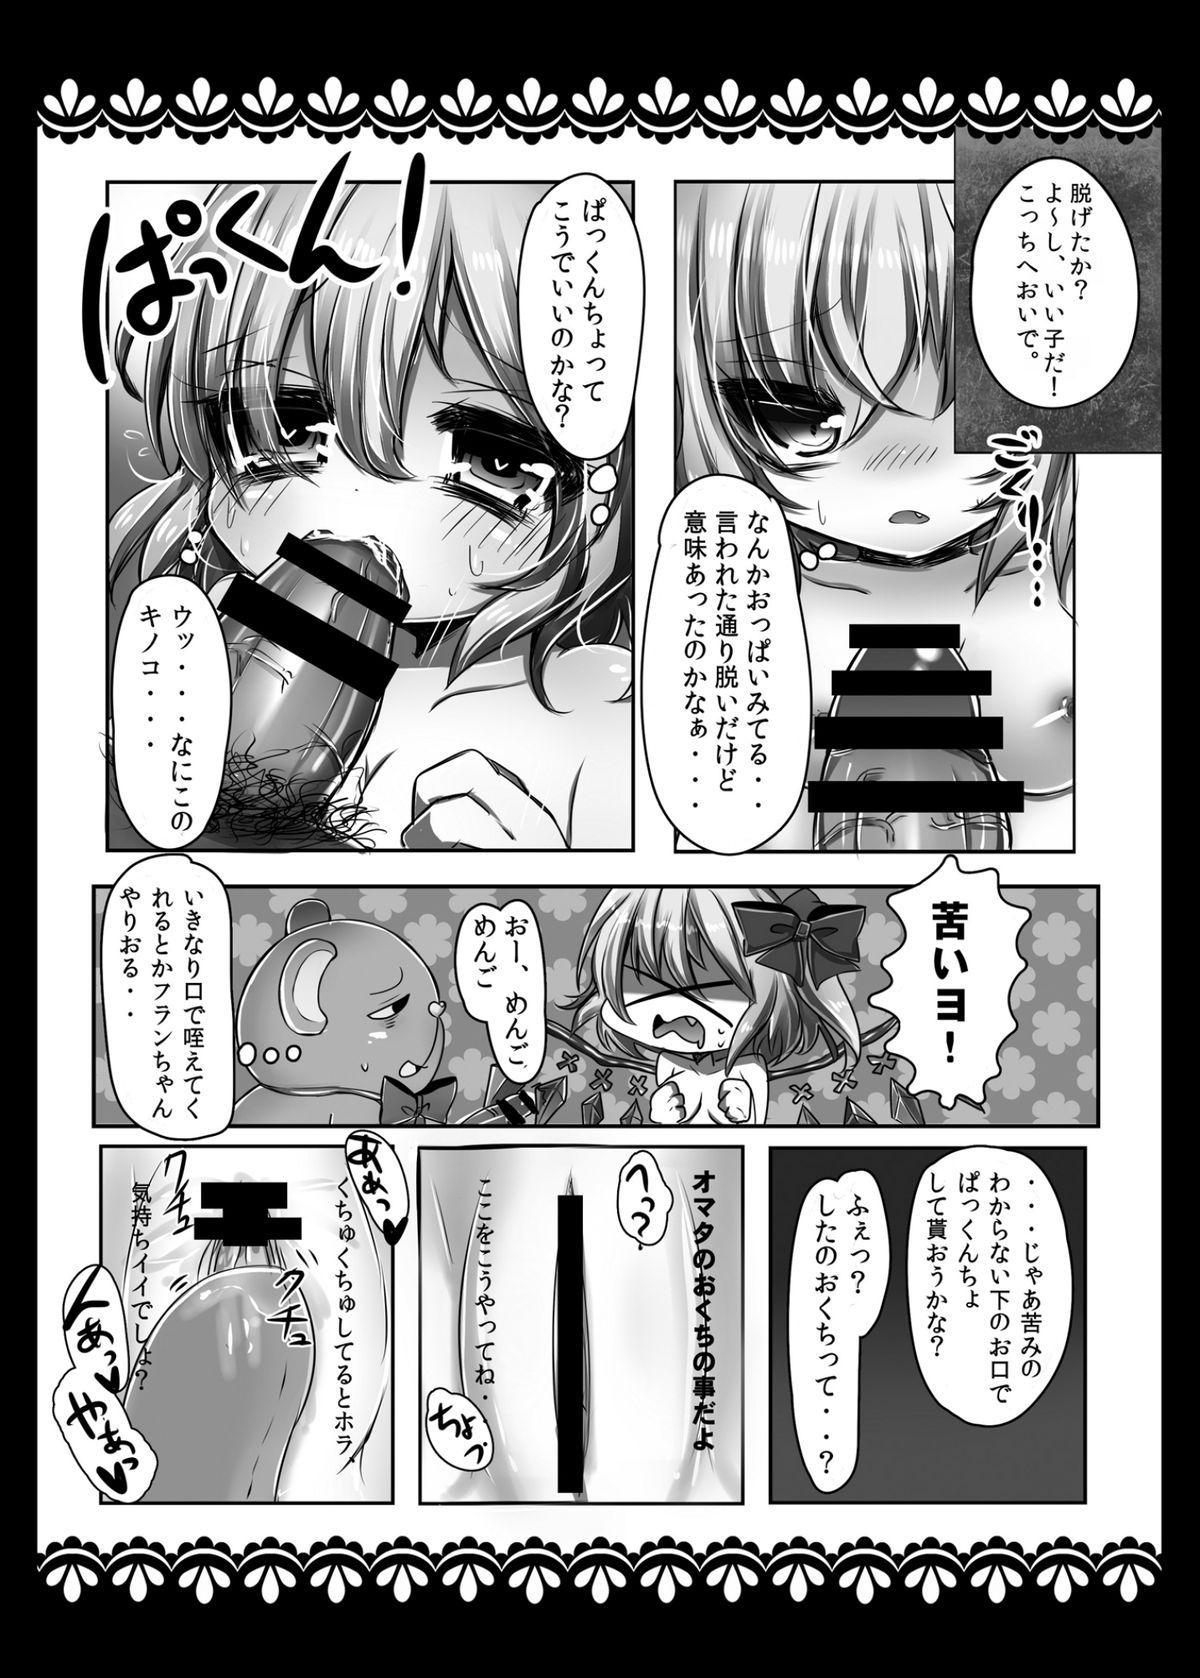 Roughsex Stuffed Animal Paco - Touhou project Granny - Page 9